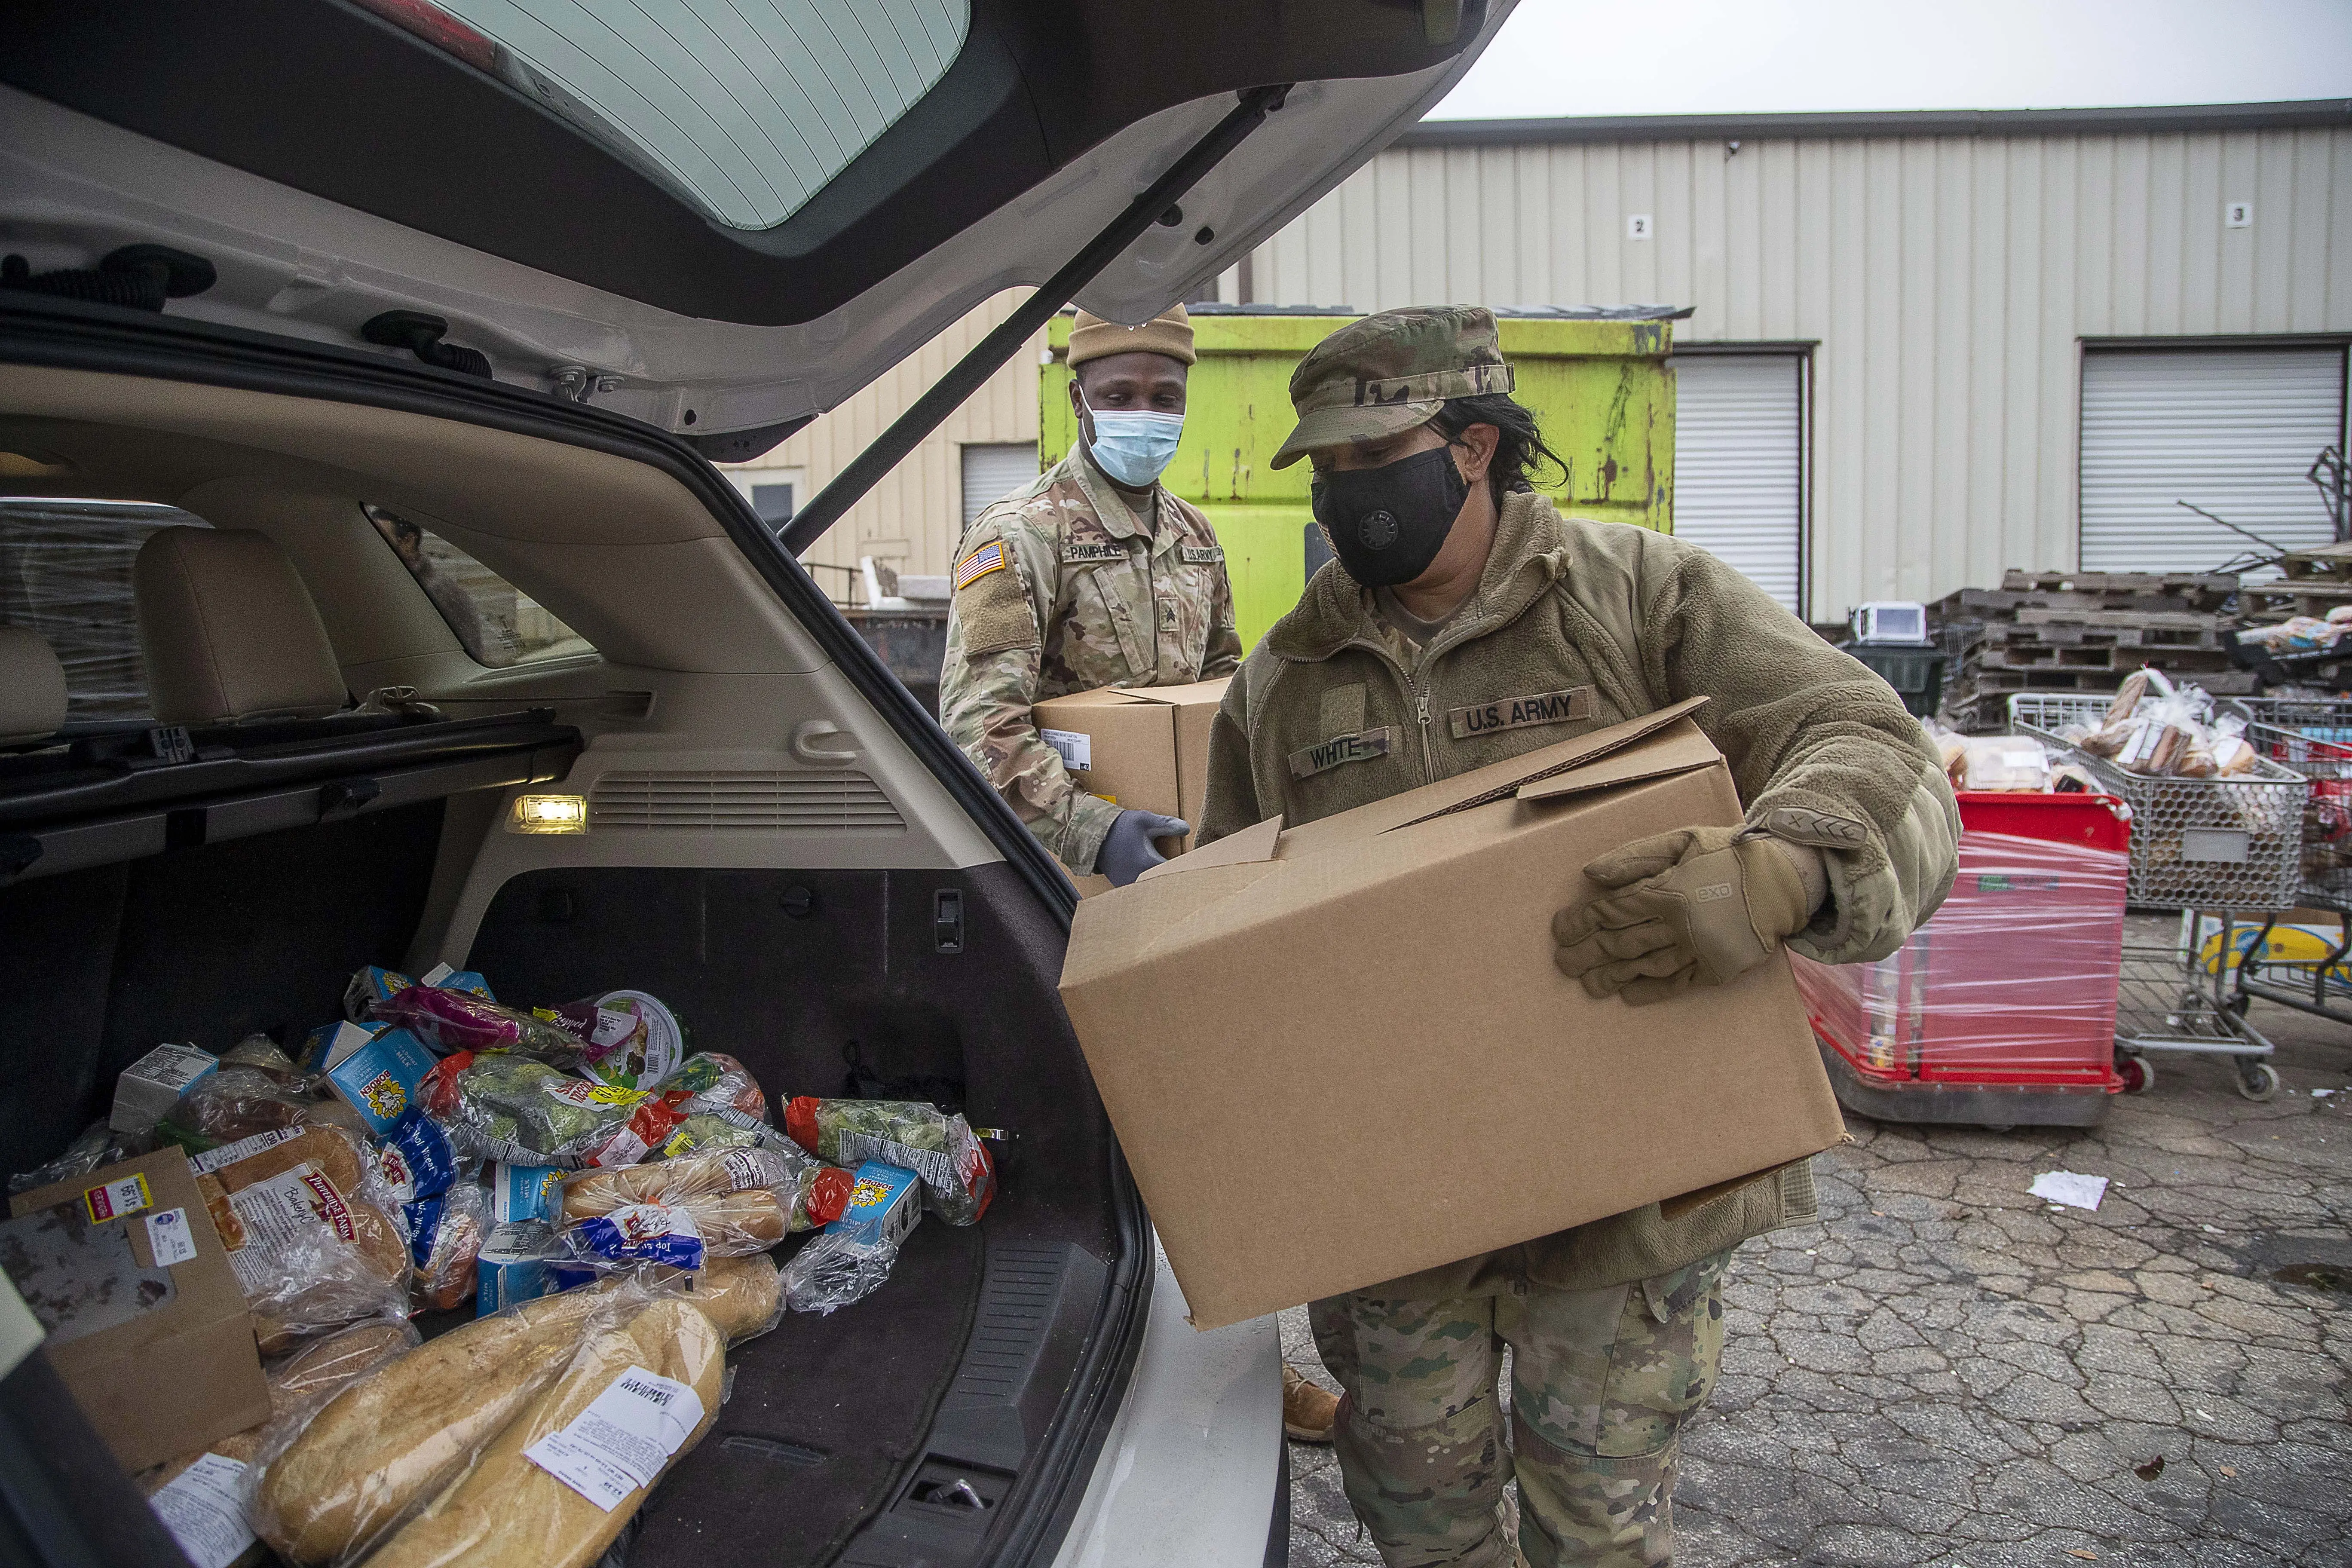 People dressed in military uniforms and wearing masks load boxes into the trunk of a car.